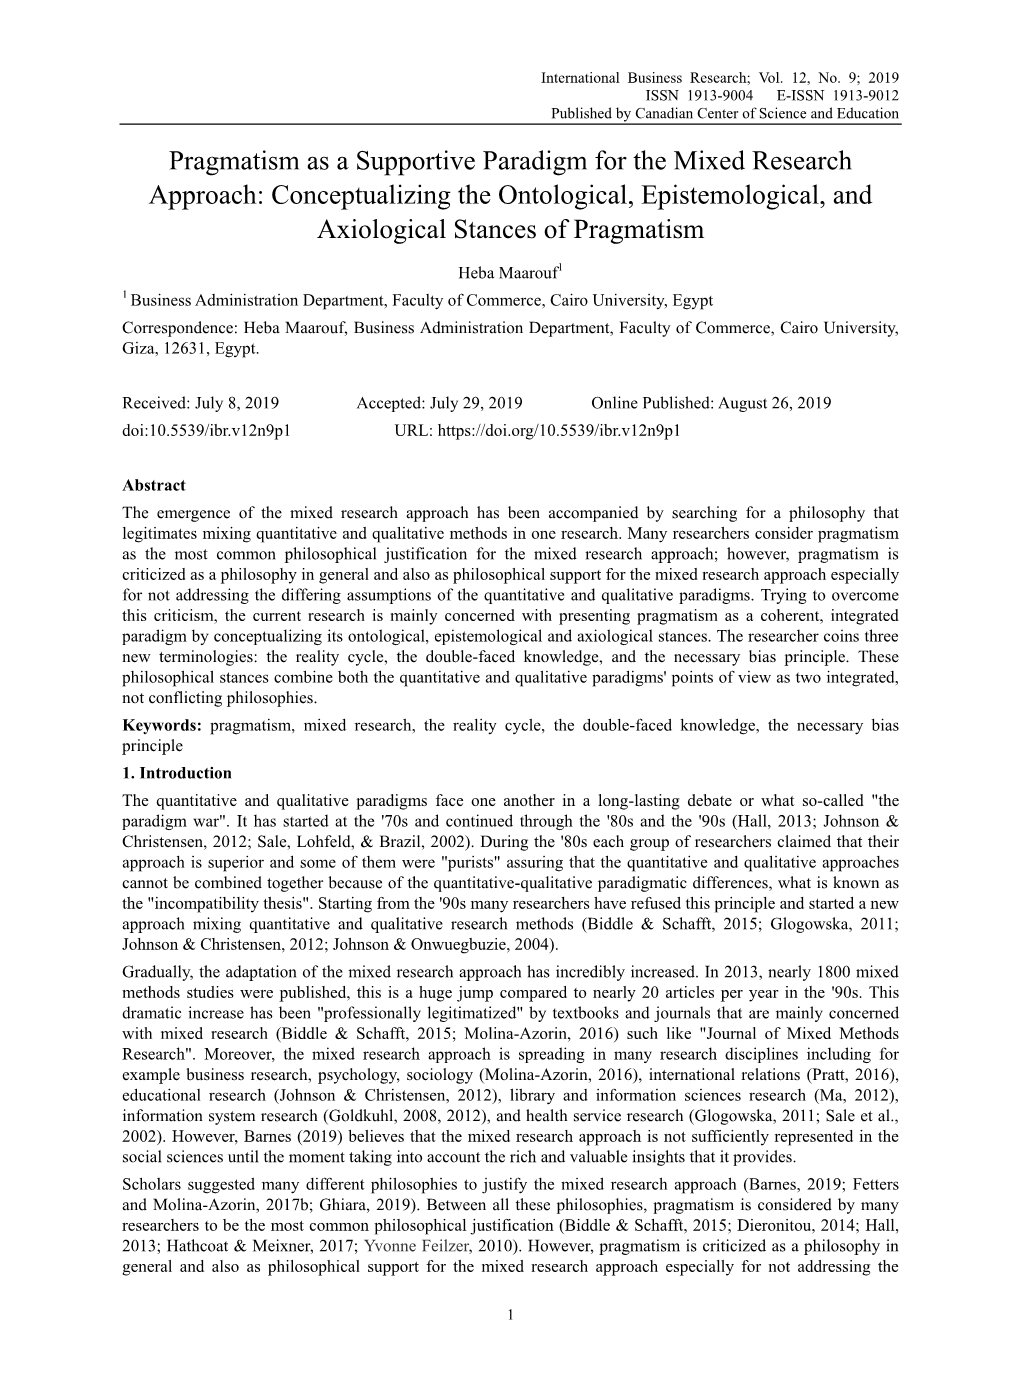 Pragmatism As a Supportive Paradigm for the Mixed Research Approach: Conceptualizing the Ontological, Epistemological, and Axiological Stances of Pragmatism